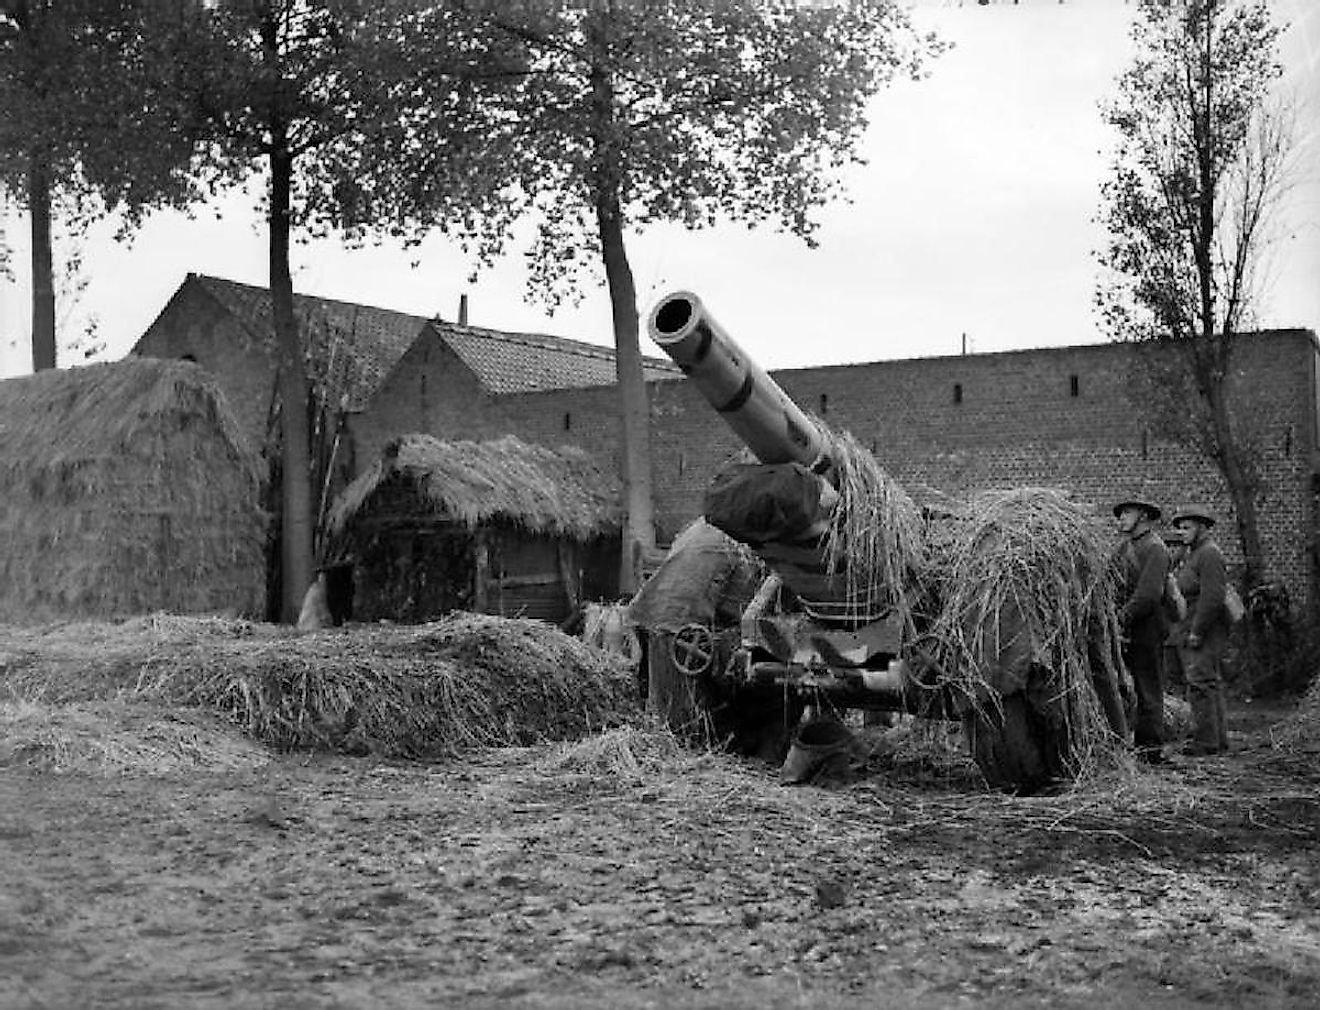 An 8-inch howitzer of the British Expeditionary Force in France during the Phoney War.